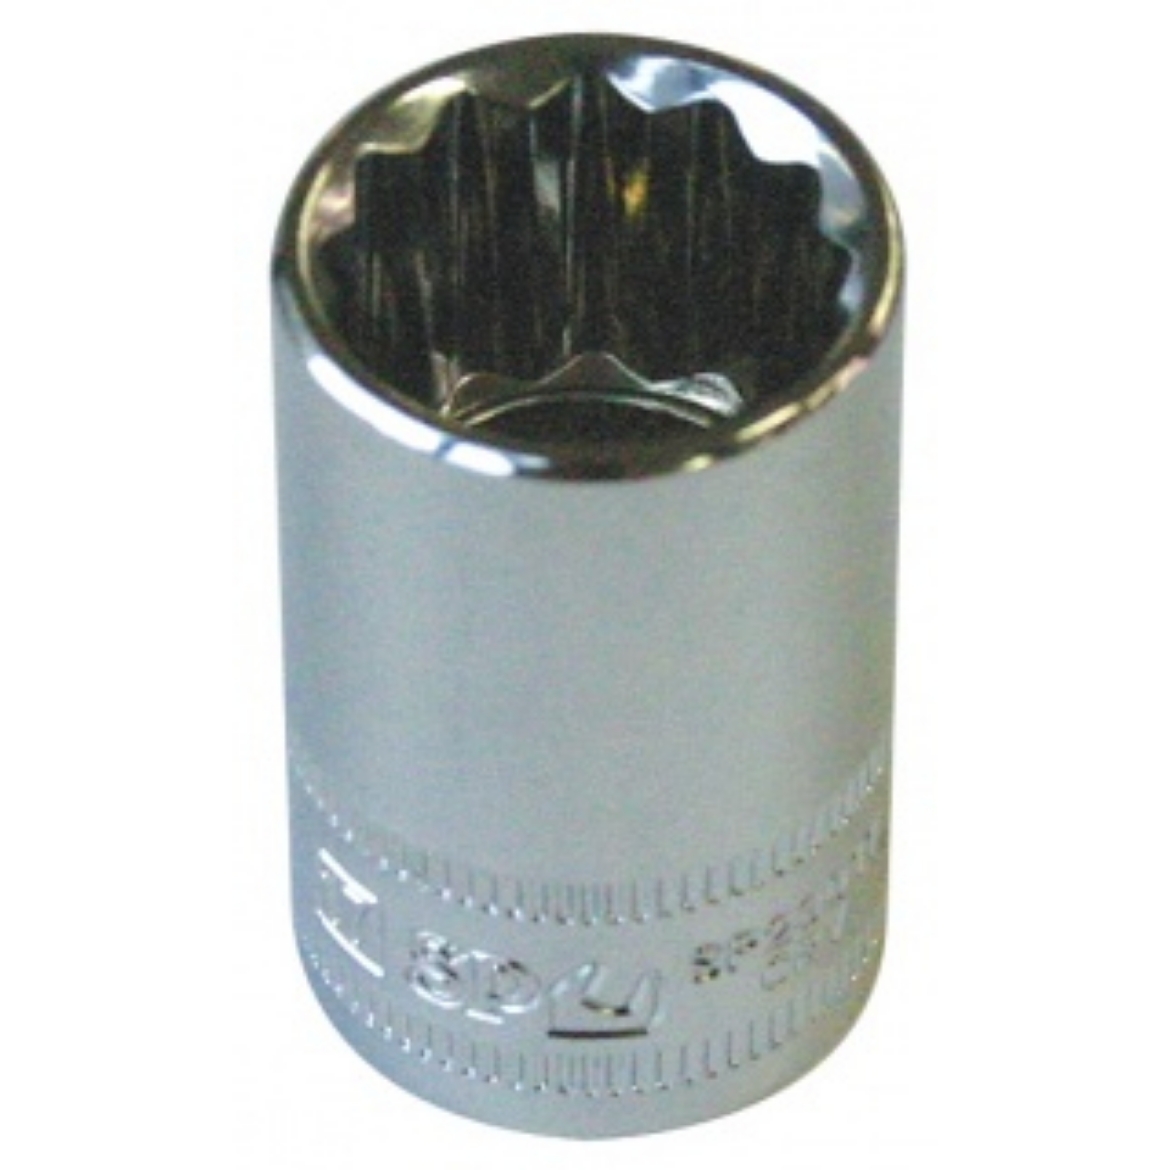 Picture of SOCKET 1/2"DR 12PT METRIC 14MM SP TOOLS